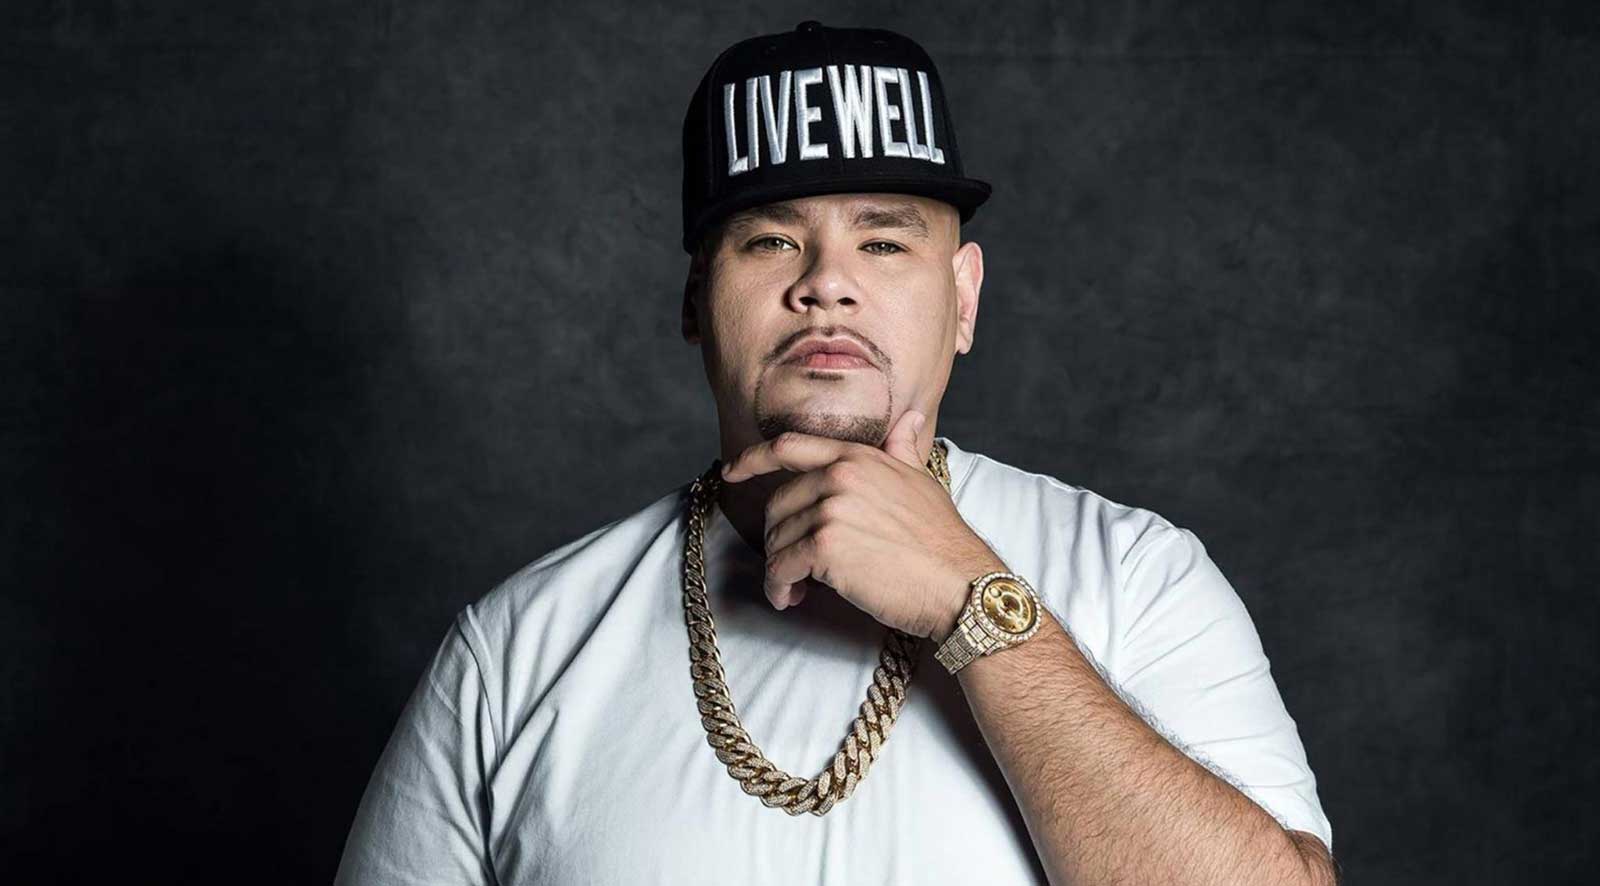 Fat Joe Net Worth 2022: How Much Is This Highest-Paid Rapper Worth?